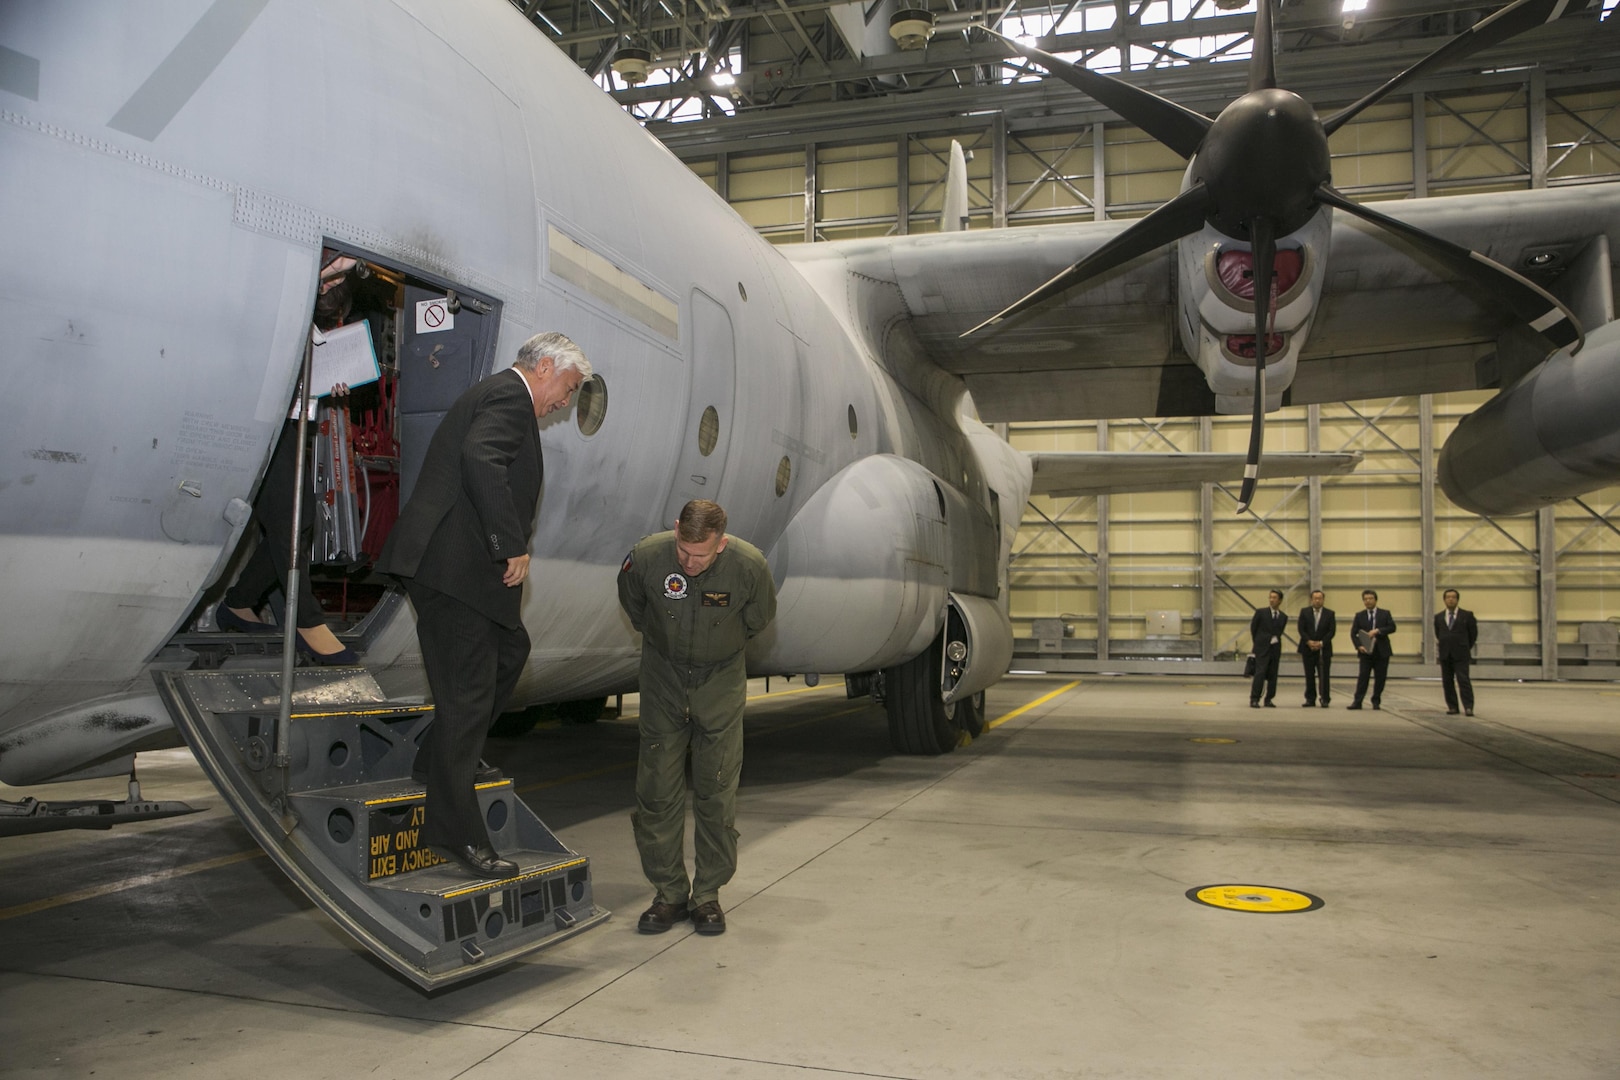 Gen Nakatani, Japanese Defense Minister, tours a KC-130J Super Hercules at Marine Aerial Refueler Transport Squadron (VMGR) 152 facilities during his visit to Marine Corps Air Station Iwakuni, Japan, Dec. 2, 2015. Station officials welcomed Nakatani before touring VMGR-152 and the air traffic control tower. This visit built a stronger bilateral understanding between station personnel and Japanese officials. (U.S. Marine Corps photo by Cpl. Carlos Cruz Jr./Released)